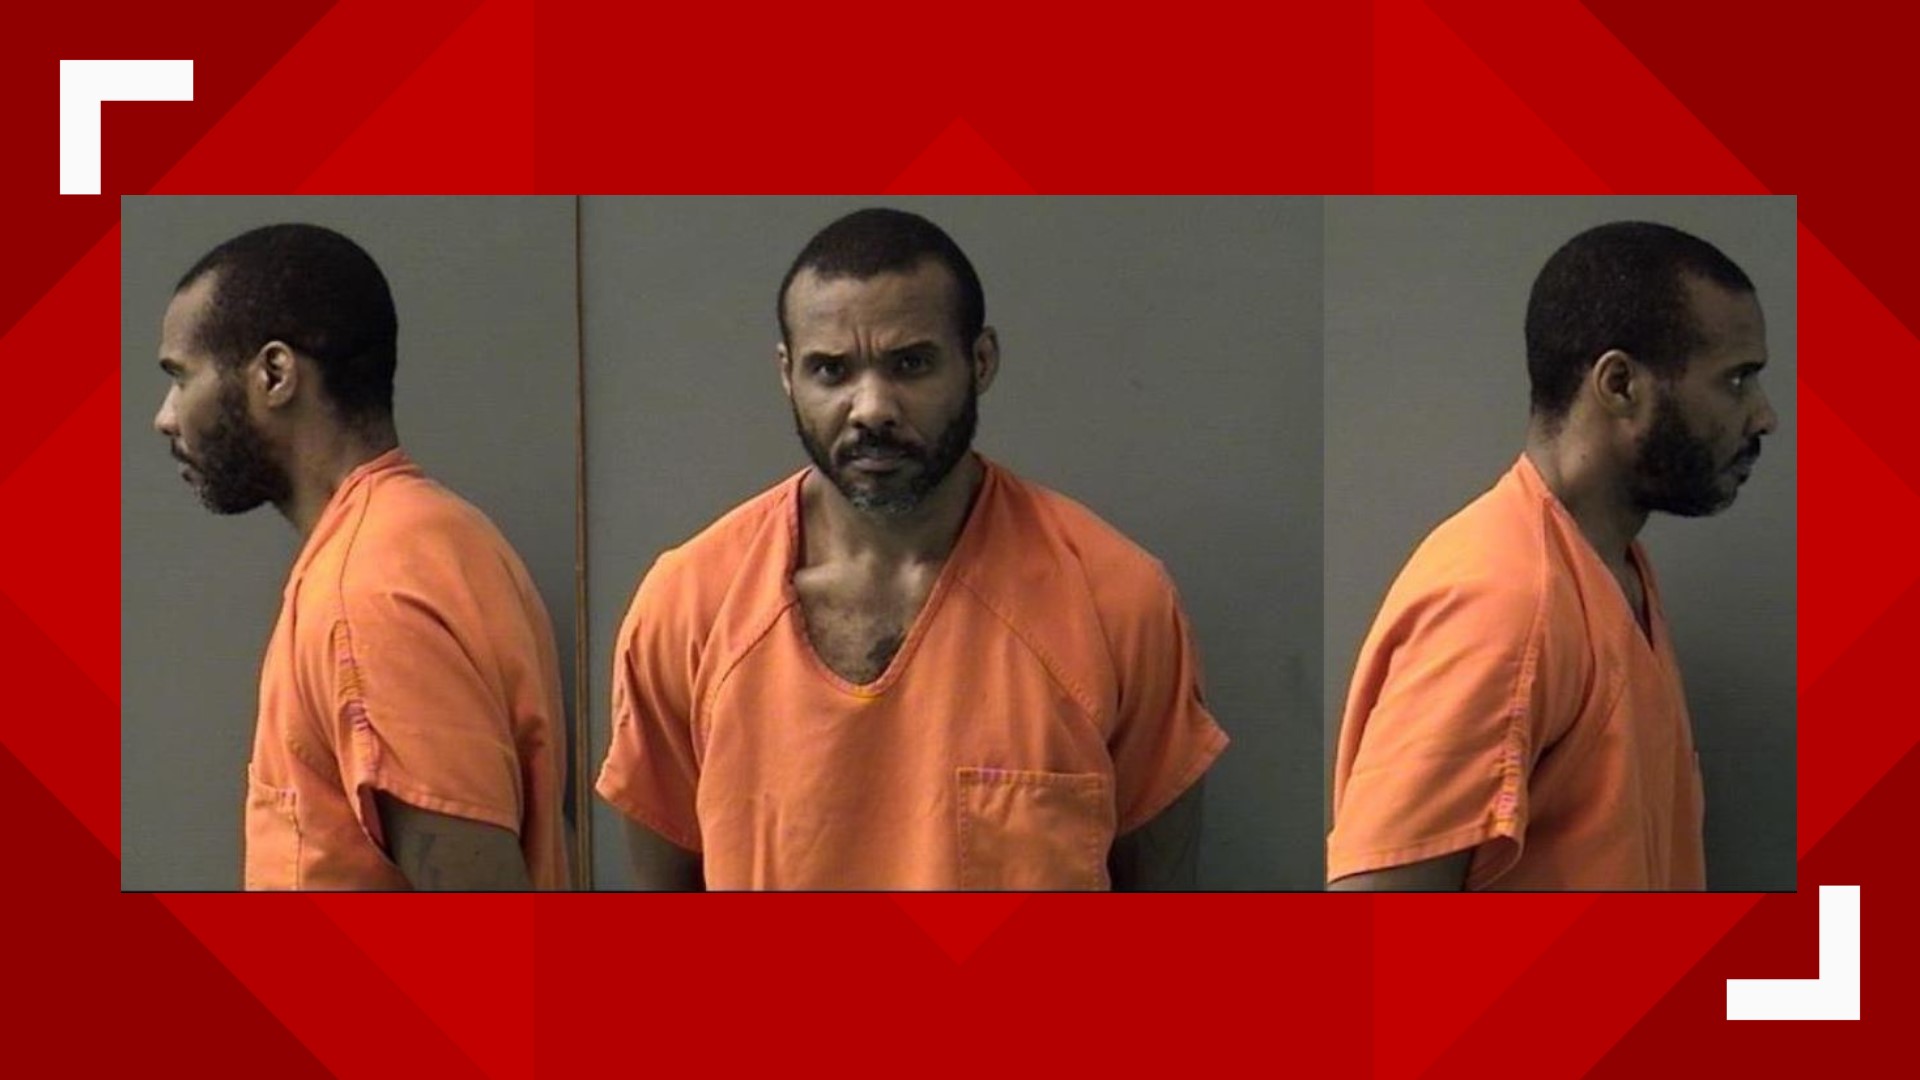 Cedric Marks, the man accused of murdering two Temple friends whose bodies were found in Oklahoma in January, appeared in court Thursday afternoon for a pretrial hearing. However, his attorneys said they couldn't move forward with the hearing because they have to review new evidence in the capital murder case.